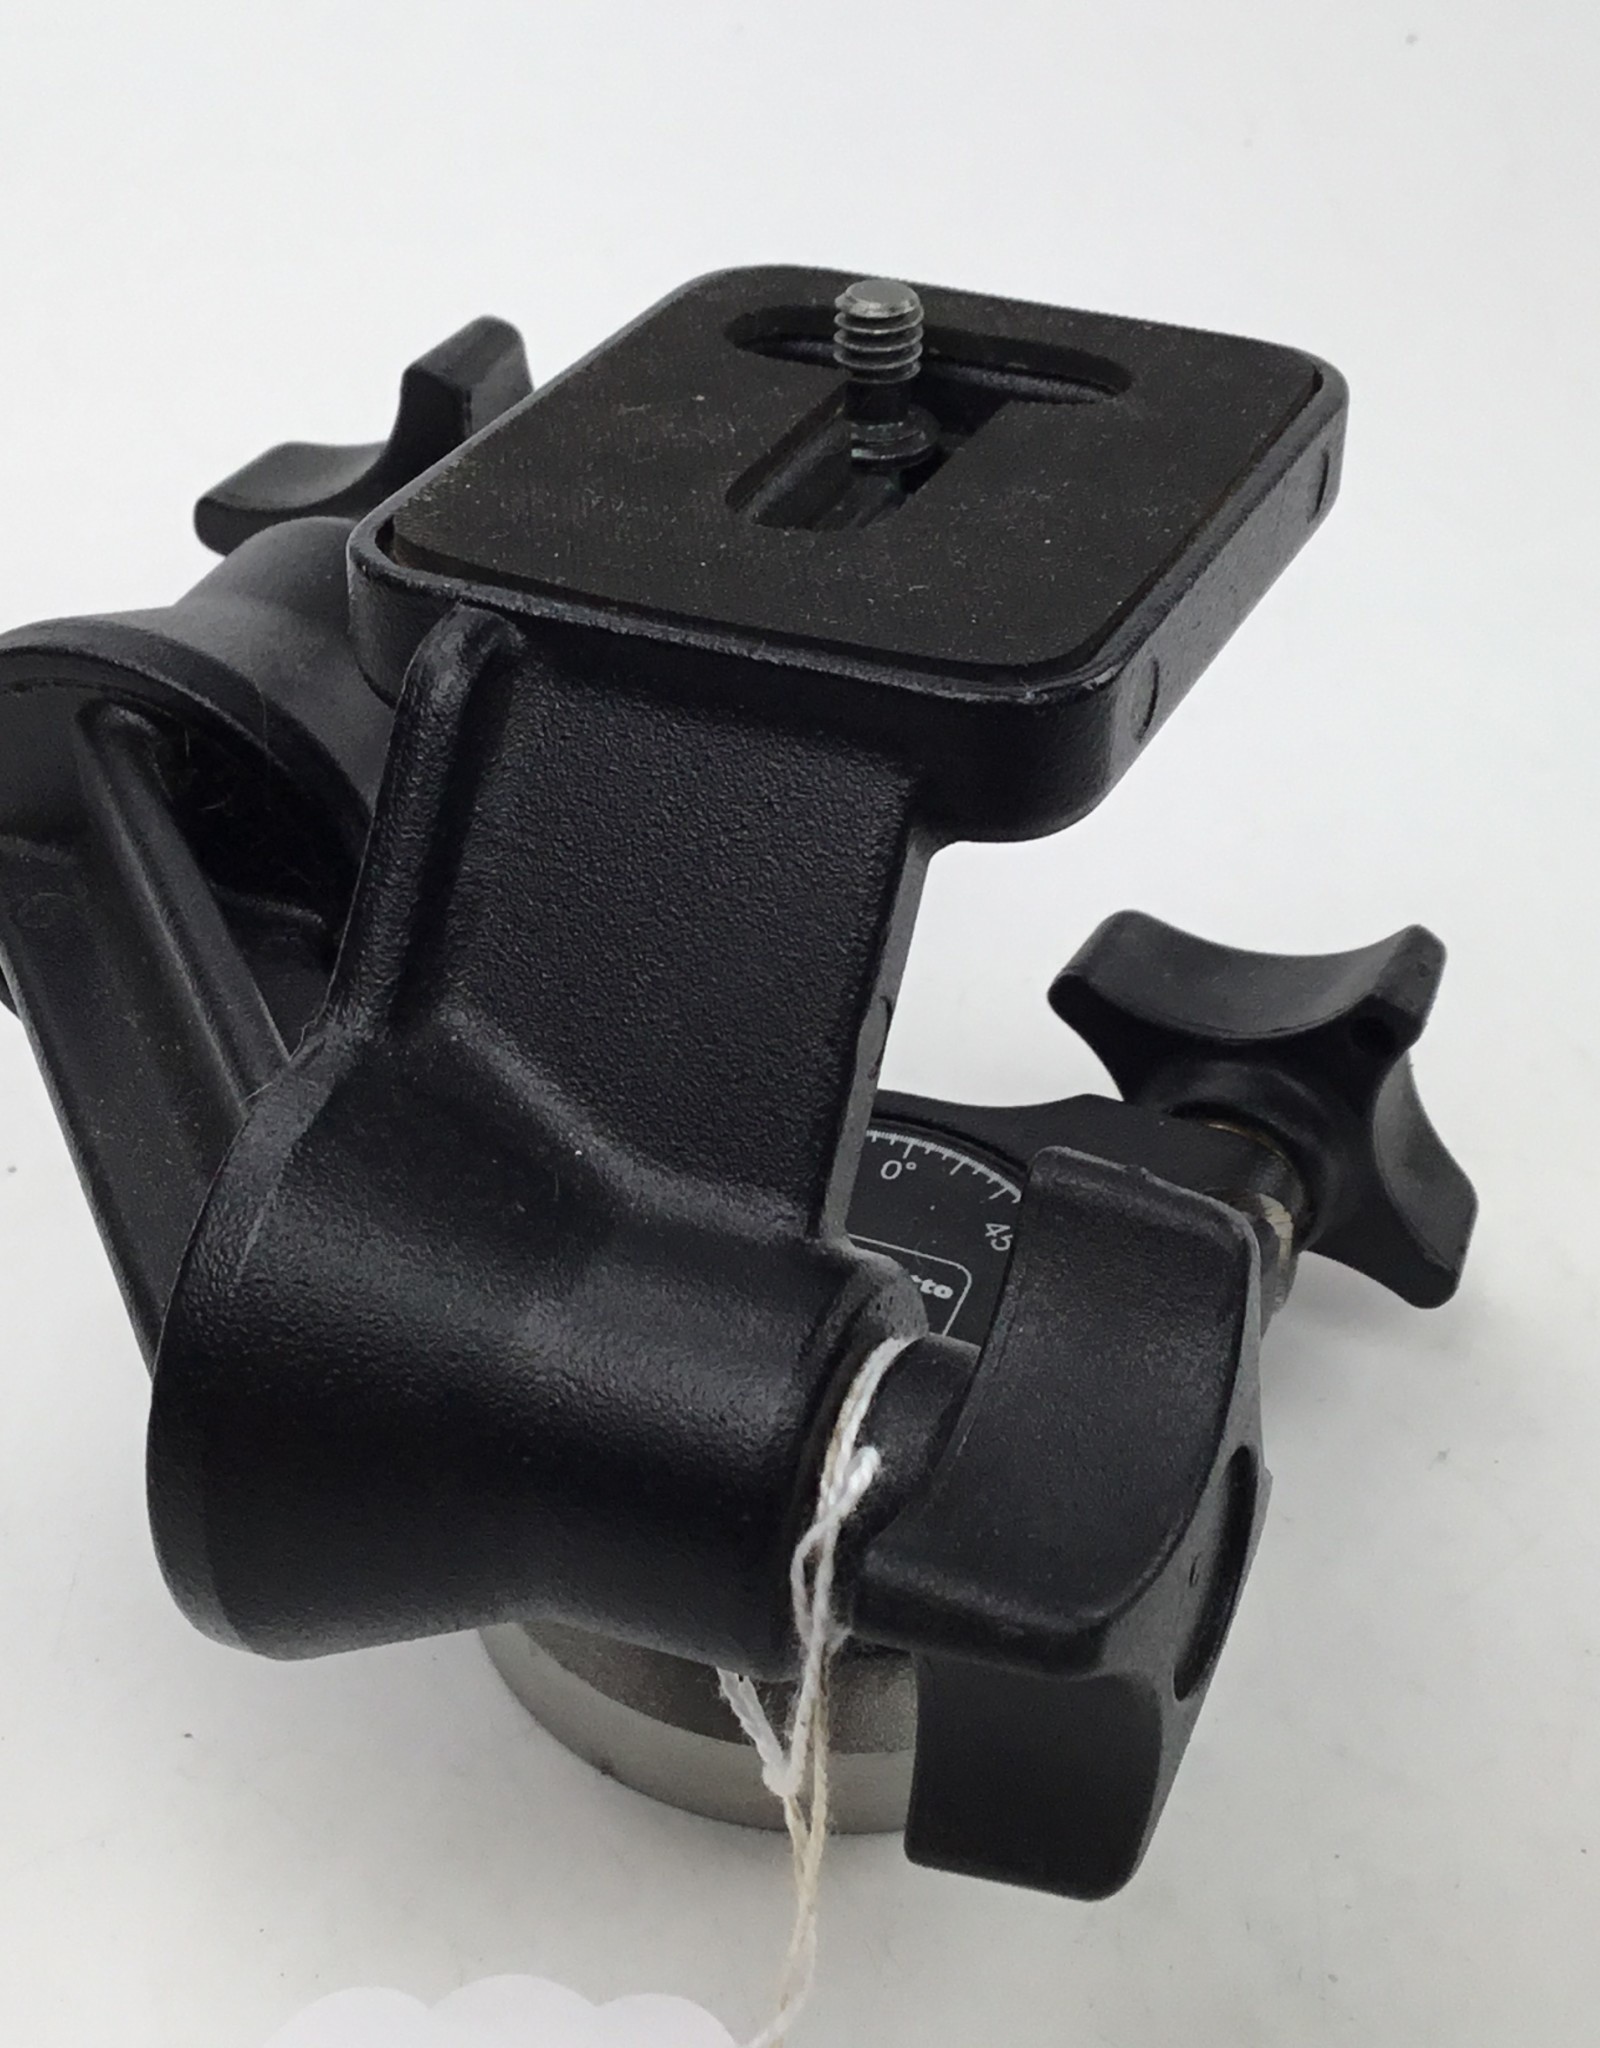 MANFROTTO Manfrotto 3025 Head Used Good